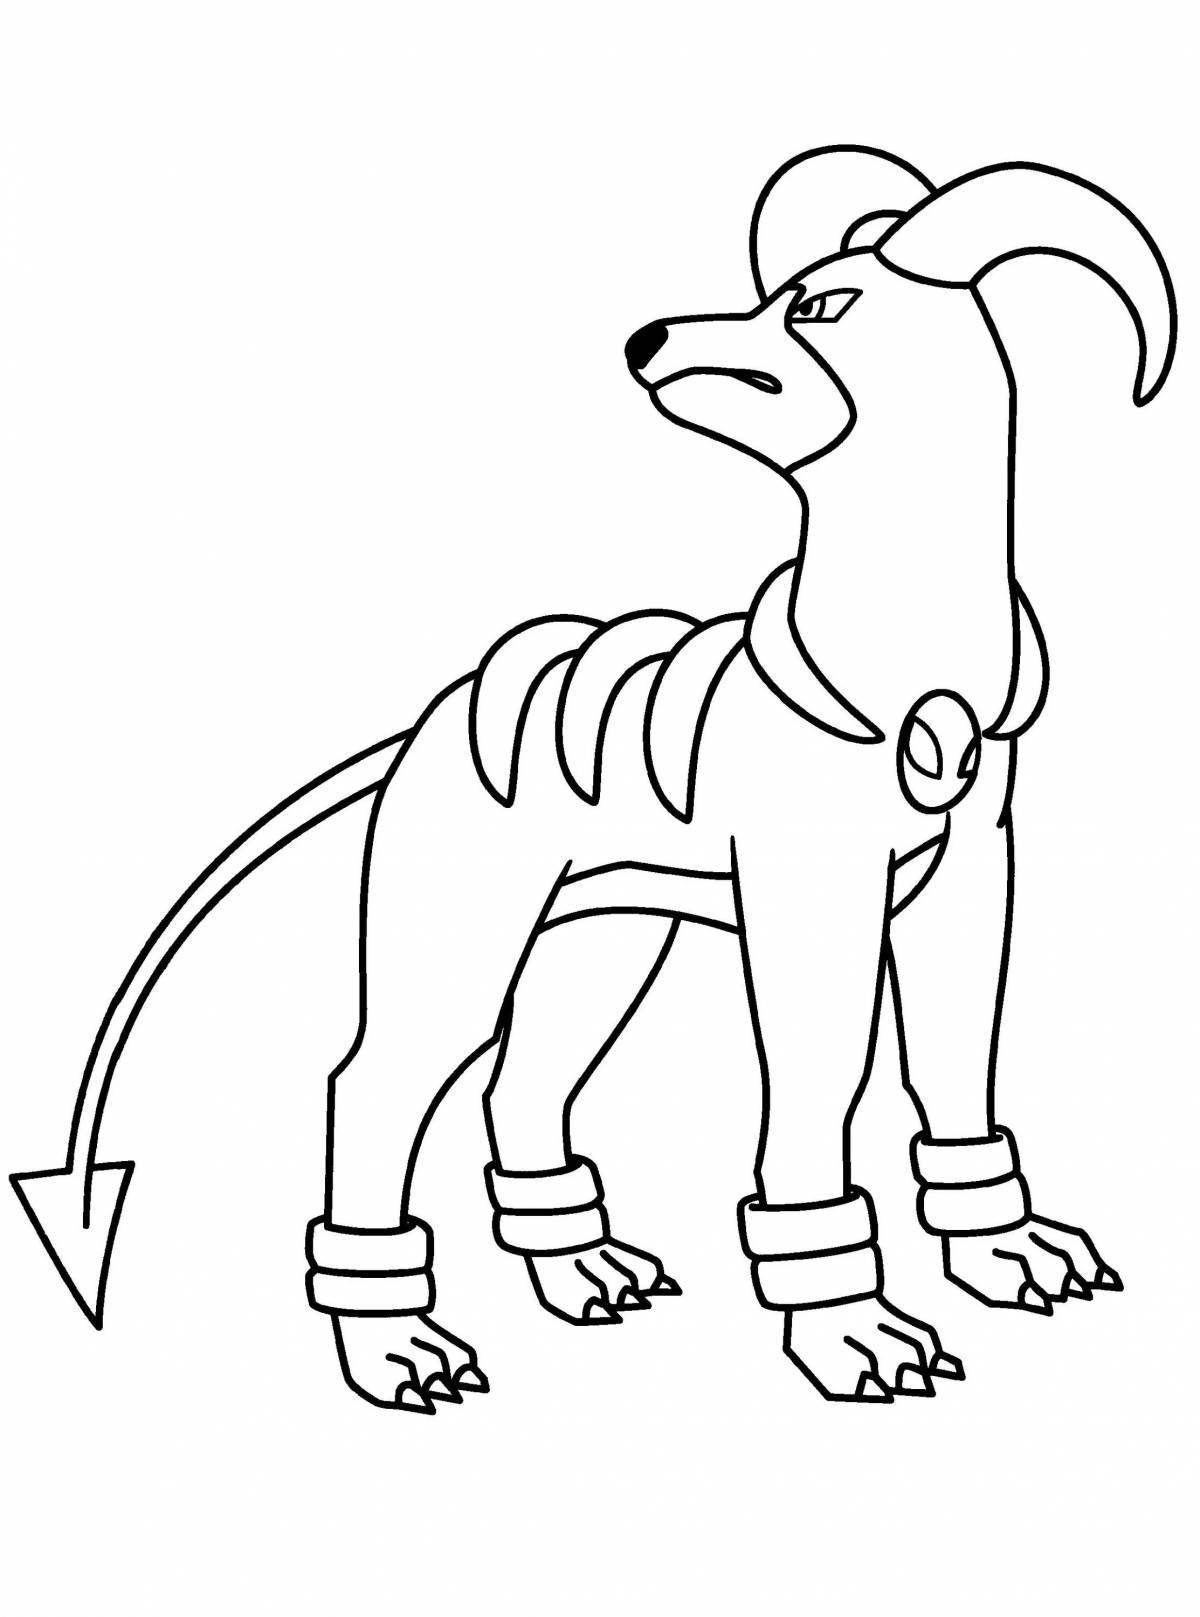 Hutao playful coloring page